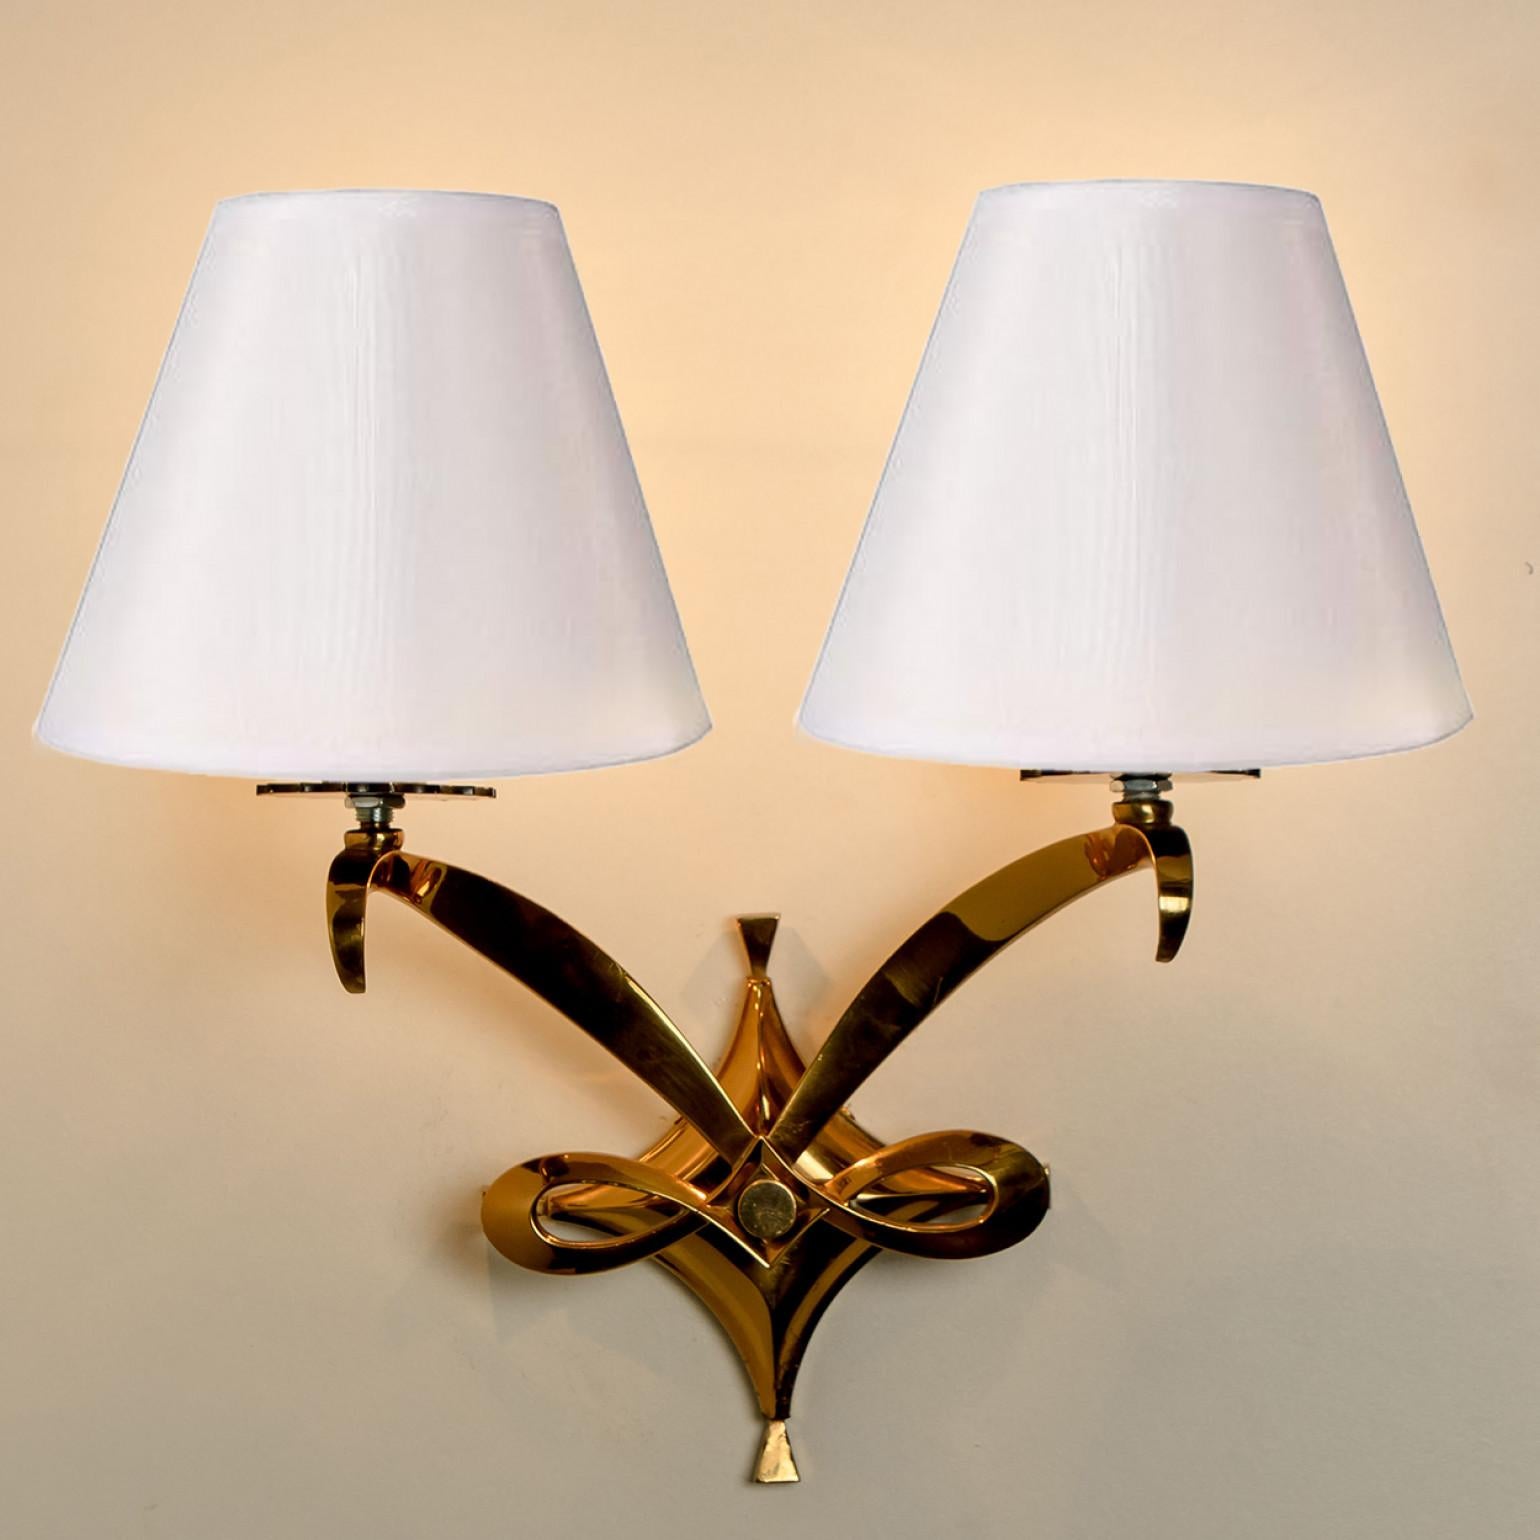 Regal brass Leleu wall sconces. Each light fixture consists of curved gold rods, with a white lampshade on top. Mounted on a gold-plated brass frame. The rods refract light beautifully. Multiple options are available in terms of lampshades, please